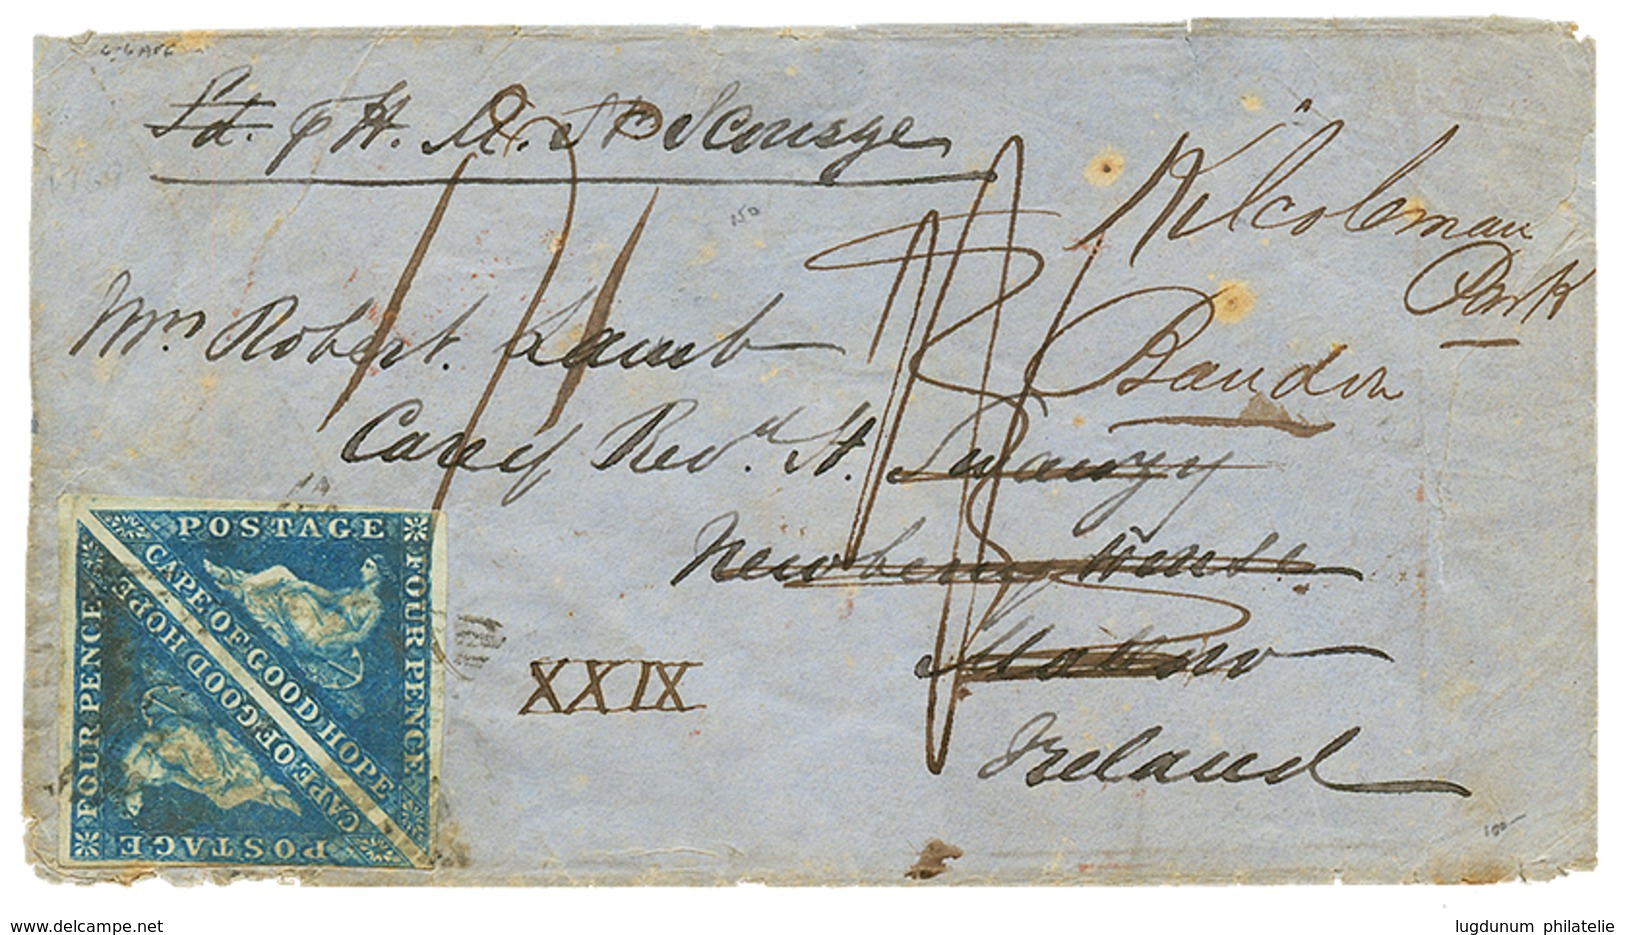 CAPE OF GOOD HOPE To IRELAND : 1857 Pair 4d (small Margin At Base But Stamp Not Touched) + Tax Marking On Envelope To MA - Kaap De Goede Hoop (1853-1904)